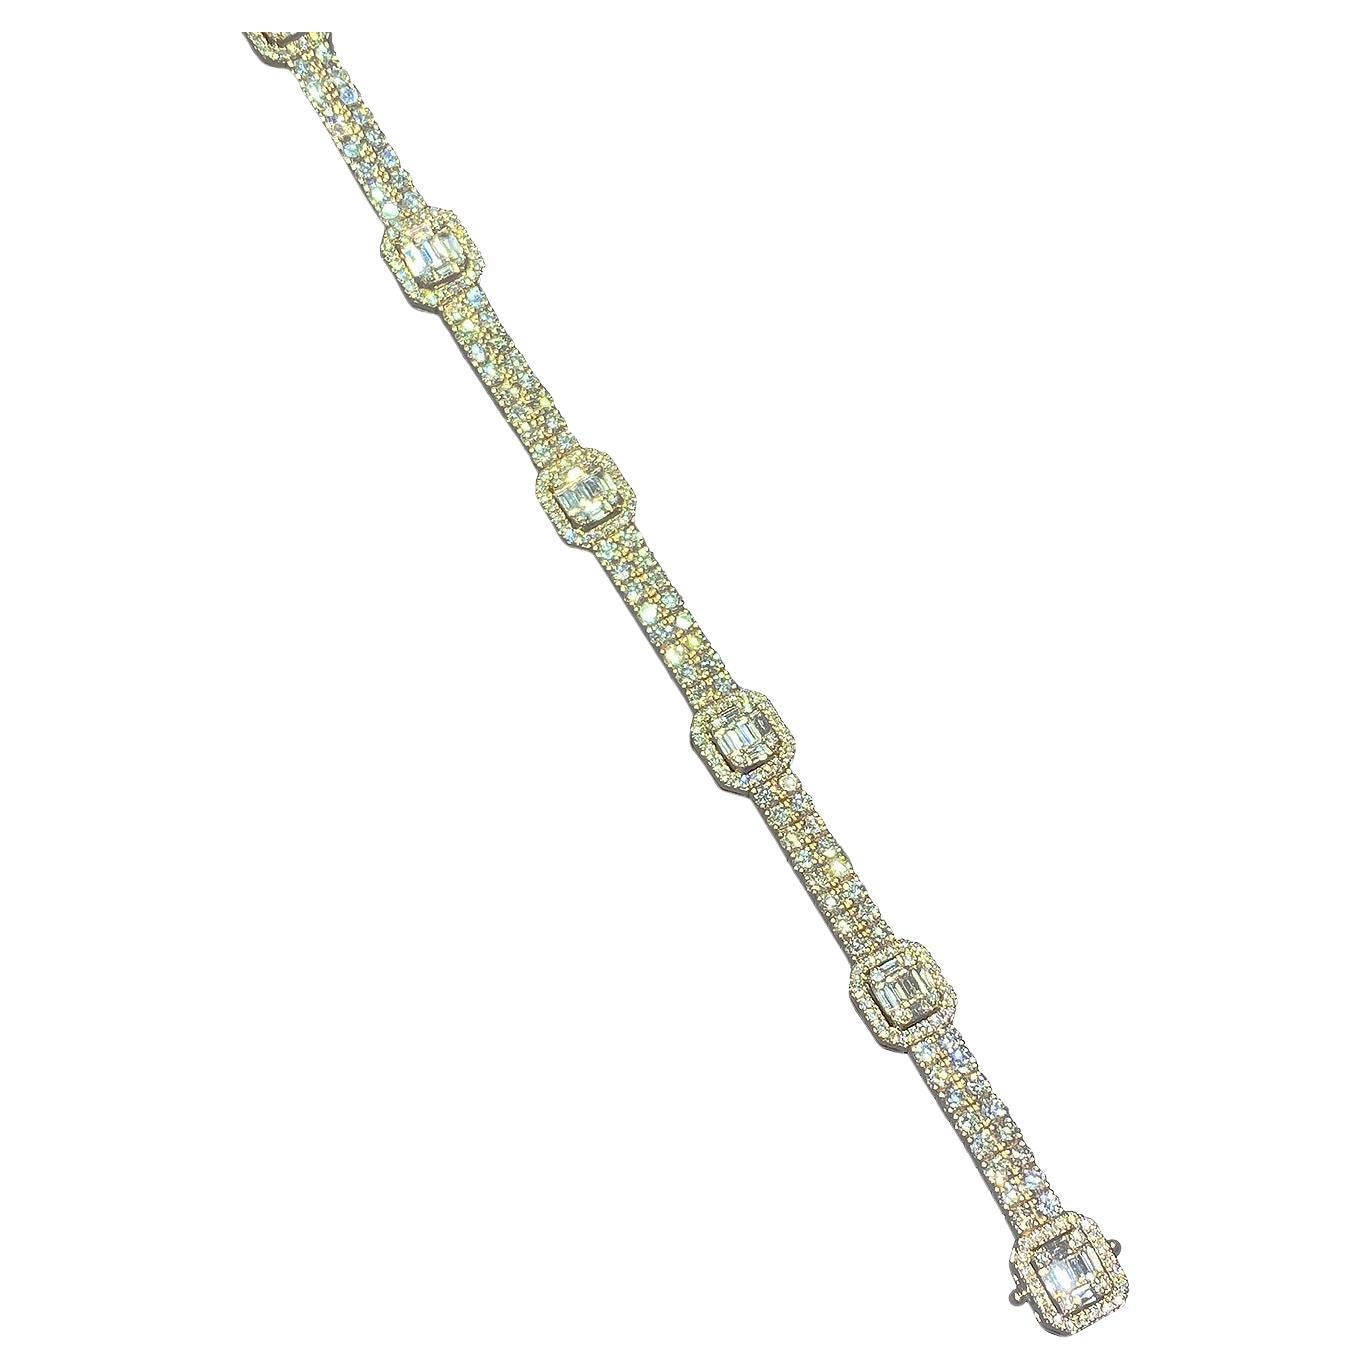 Baguette Every Day Diamond Yellow 18K Gold Bracelet for Her